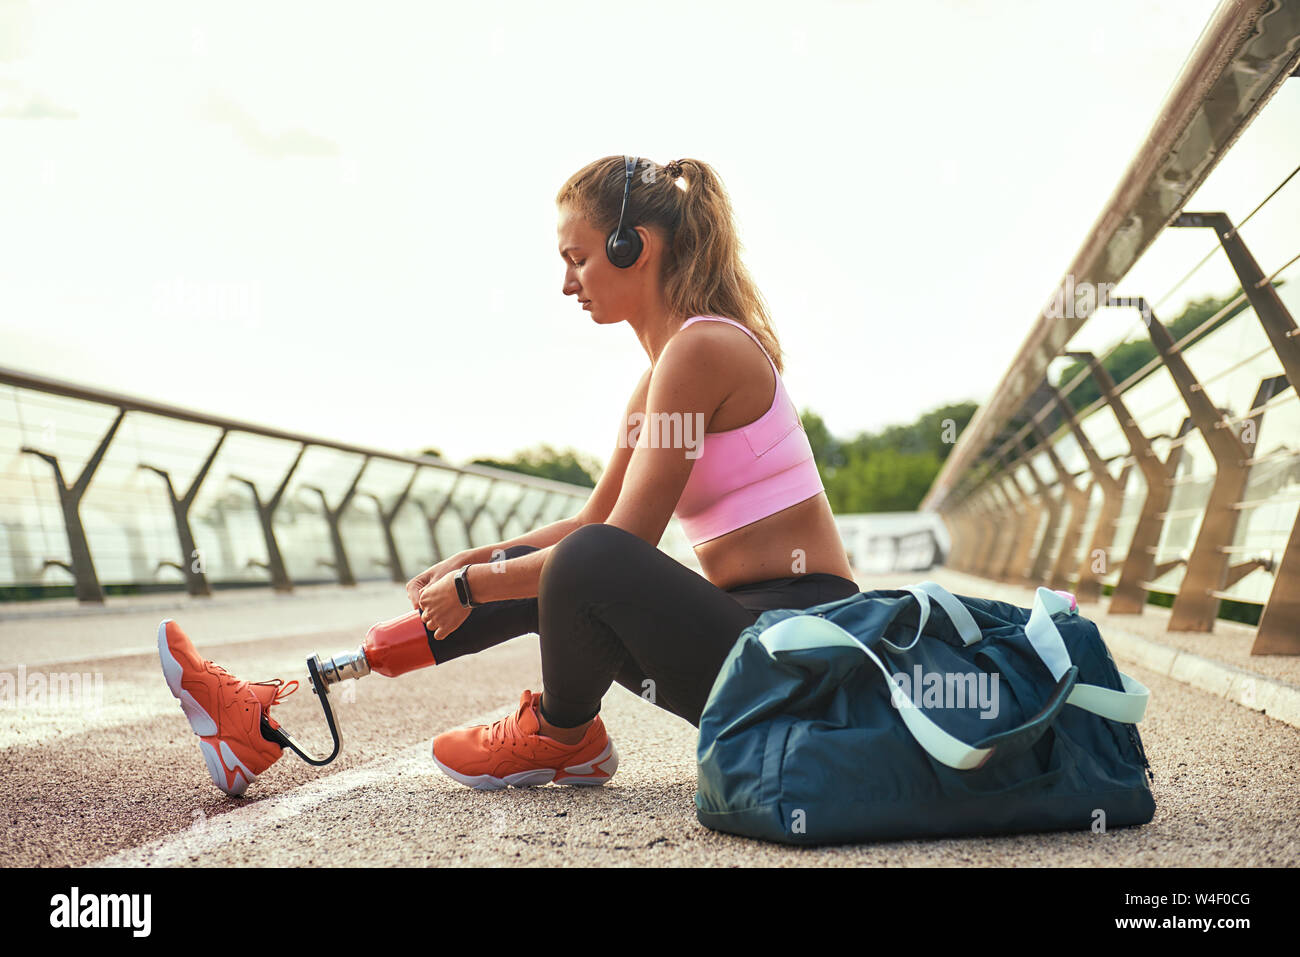 Young beautiful athletic woman with bionic prosthetic leg doing